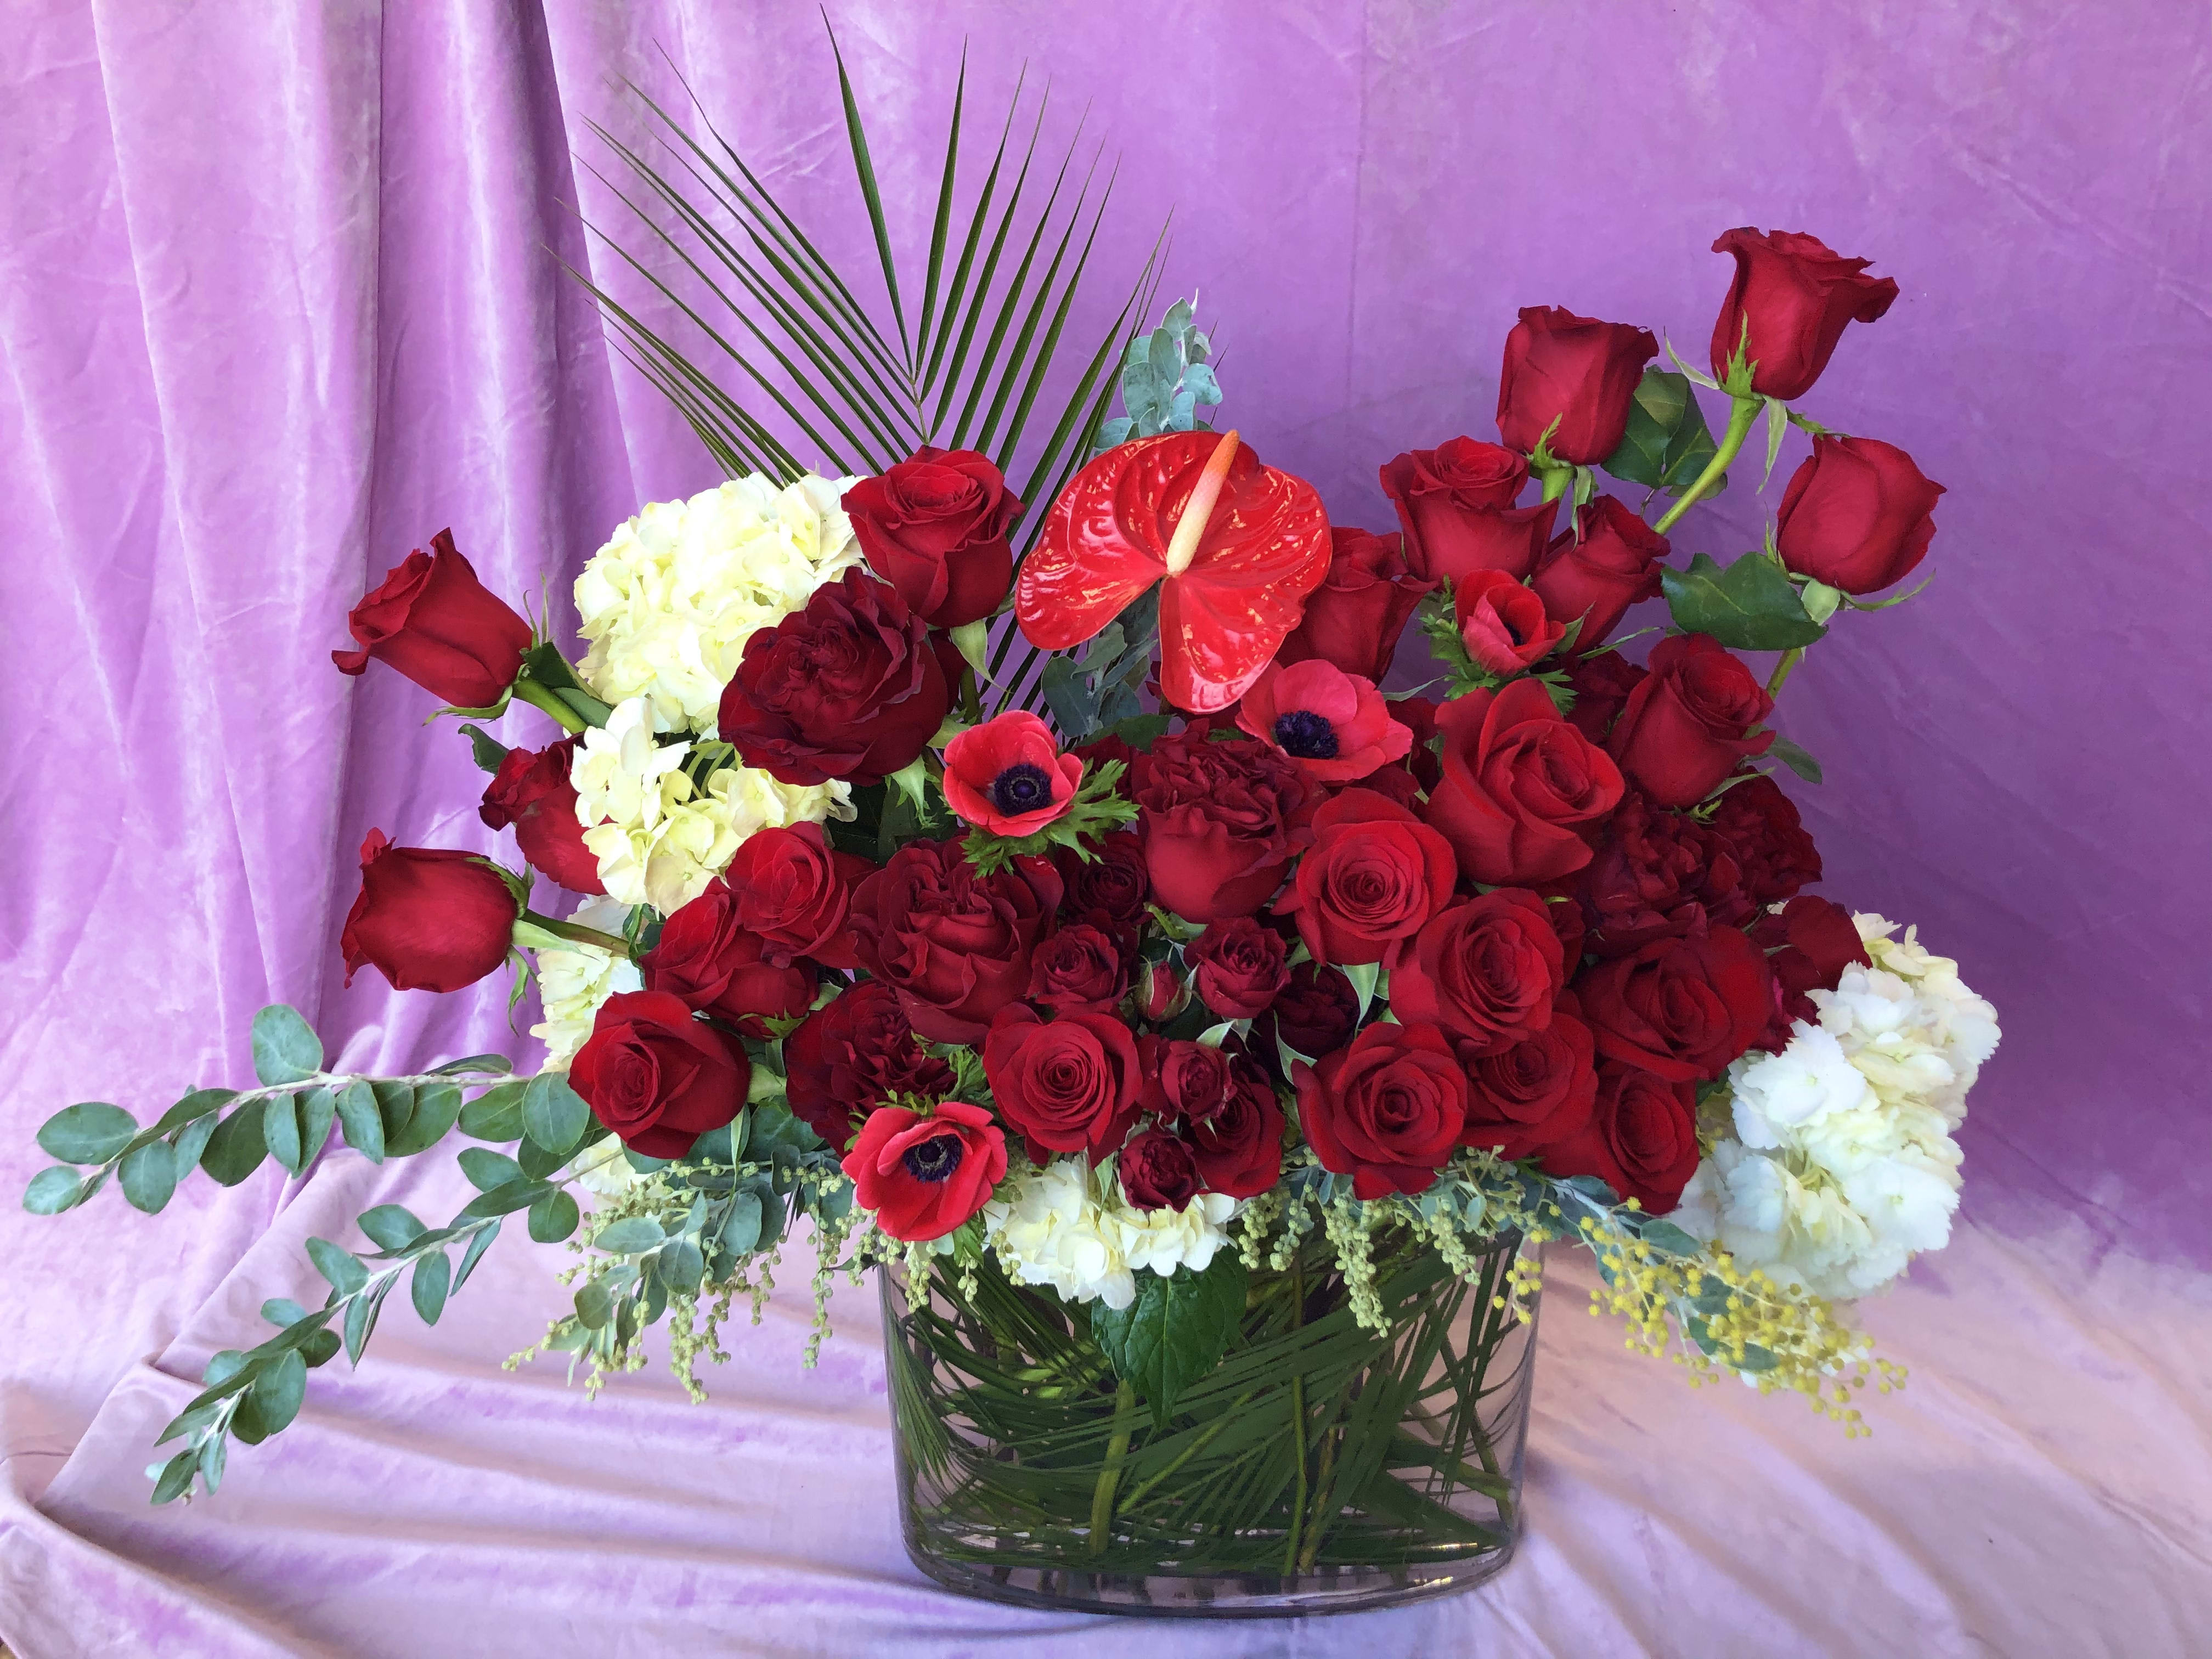 Always Be My Baby - Reds - Variety of red premium blooms in a clear glass 12&quot; oval vase. This full and lush large designer's choice Valentine's Day arrangement is hand crafted in Las Vegas by our all-women design team using the freshest red roses and red garden roses from around the world.  